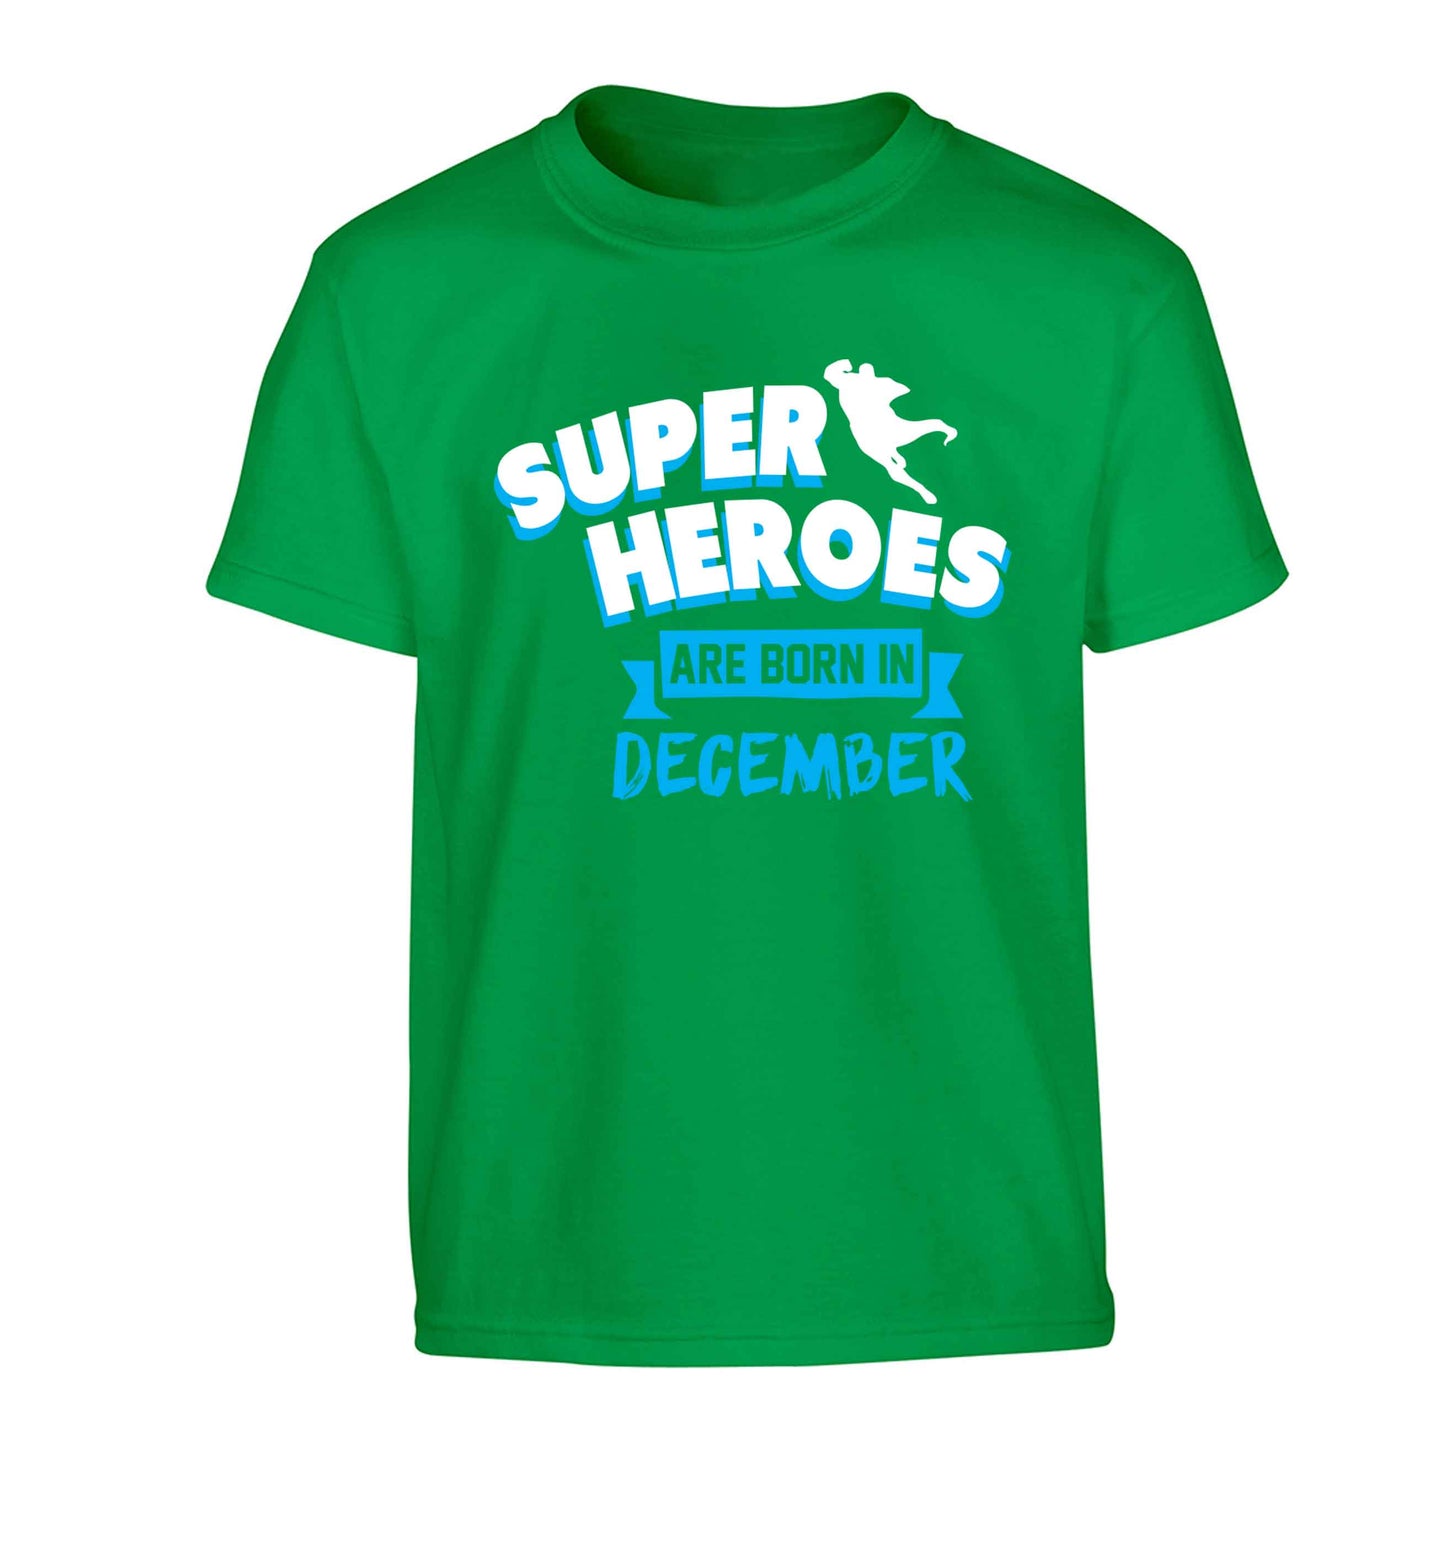 Superheroes are born in December Children's green Tshirt 12-13 Years